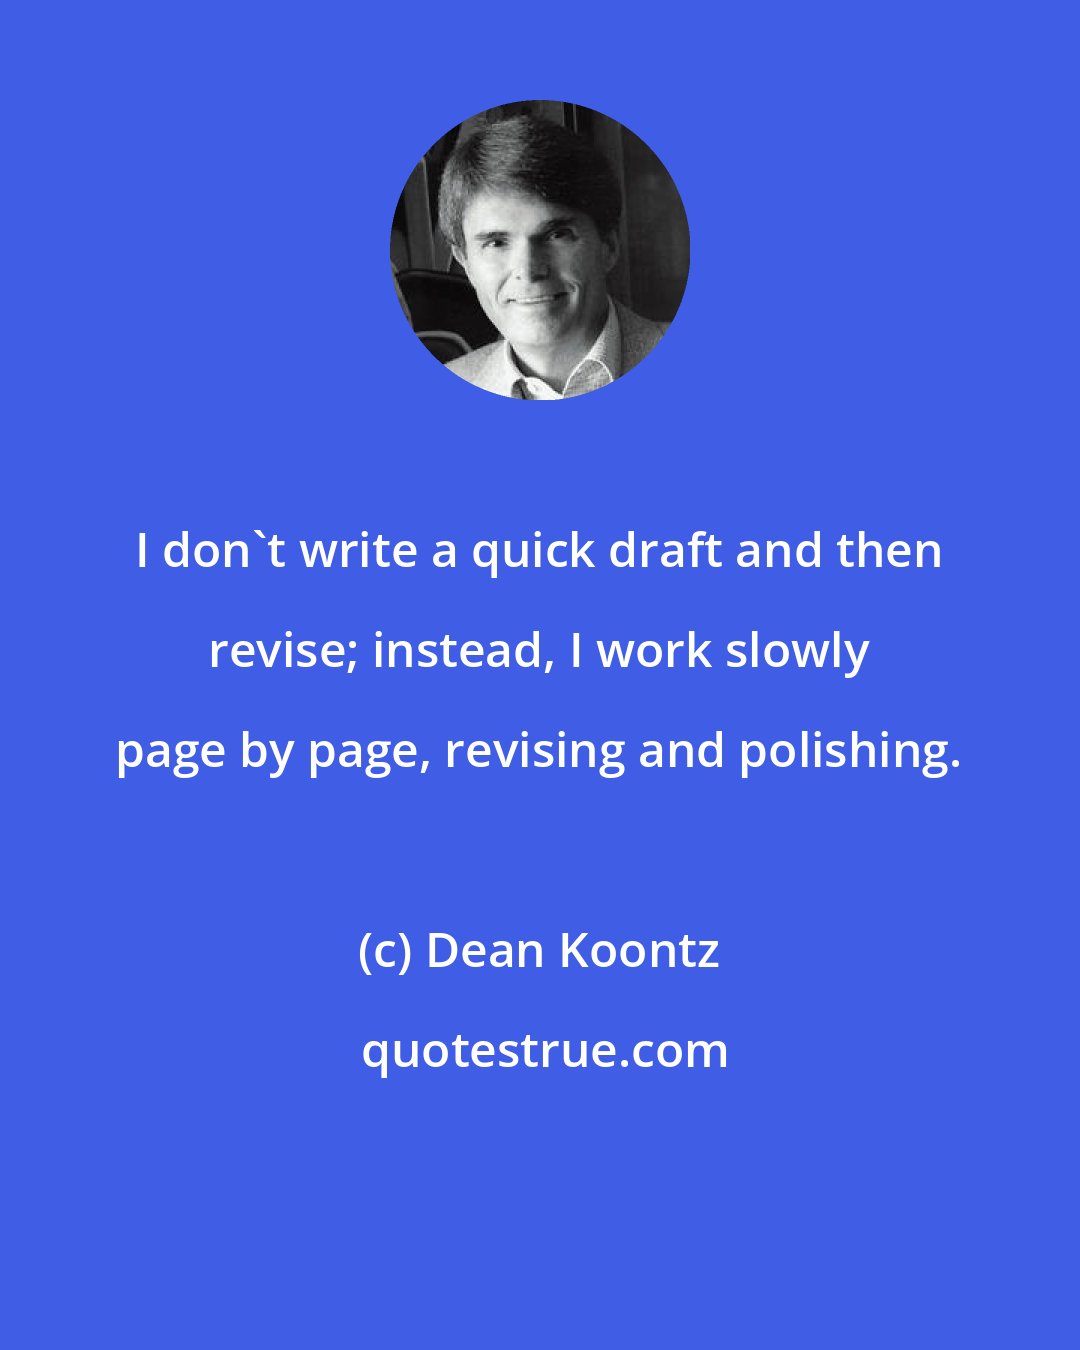 Dean Koontz: I don't write a quick draft and then revise; instead, I work slowly page by page, revising and polishing.